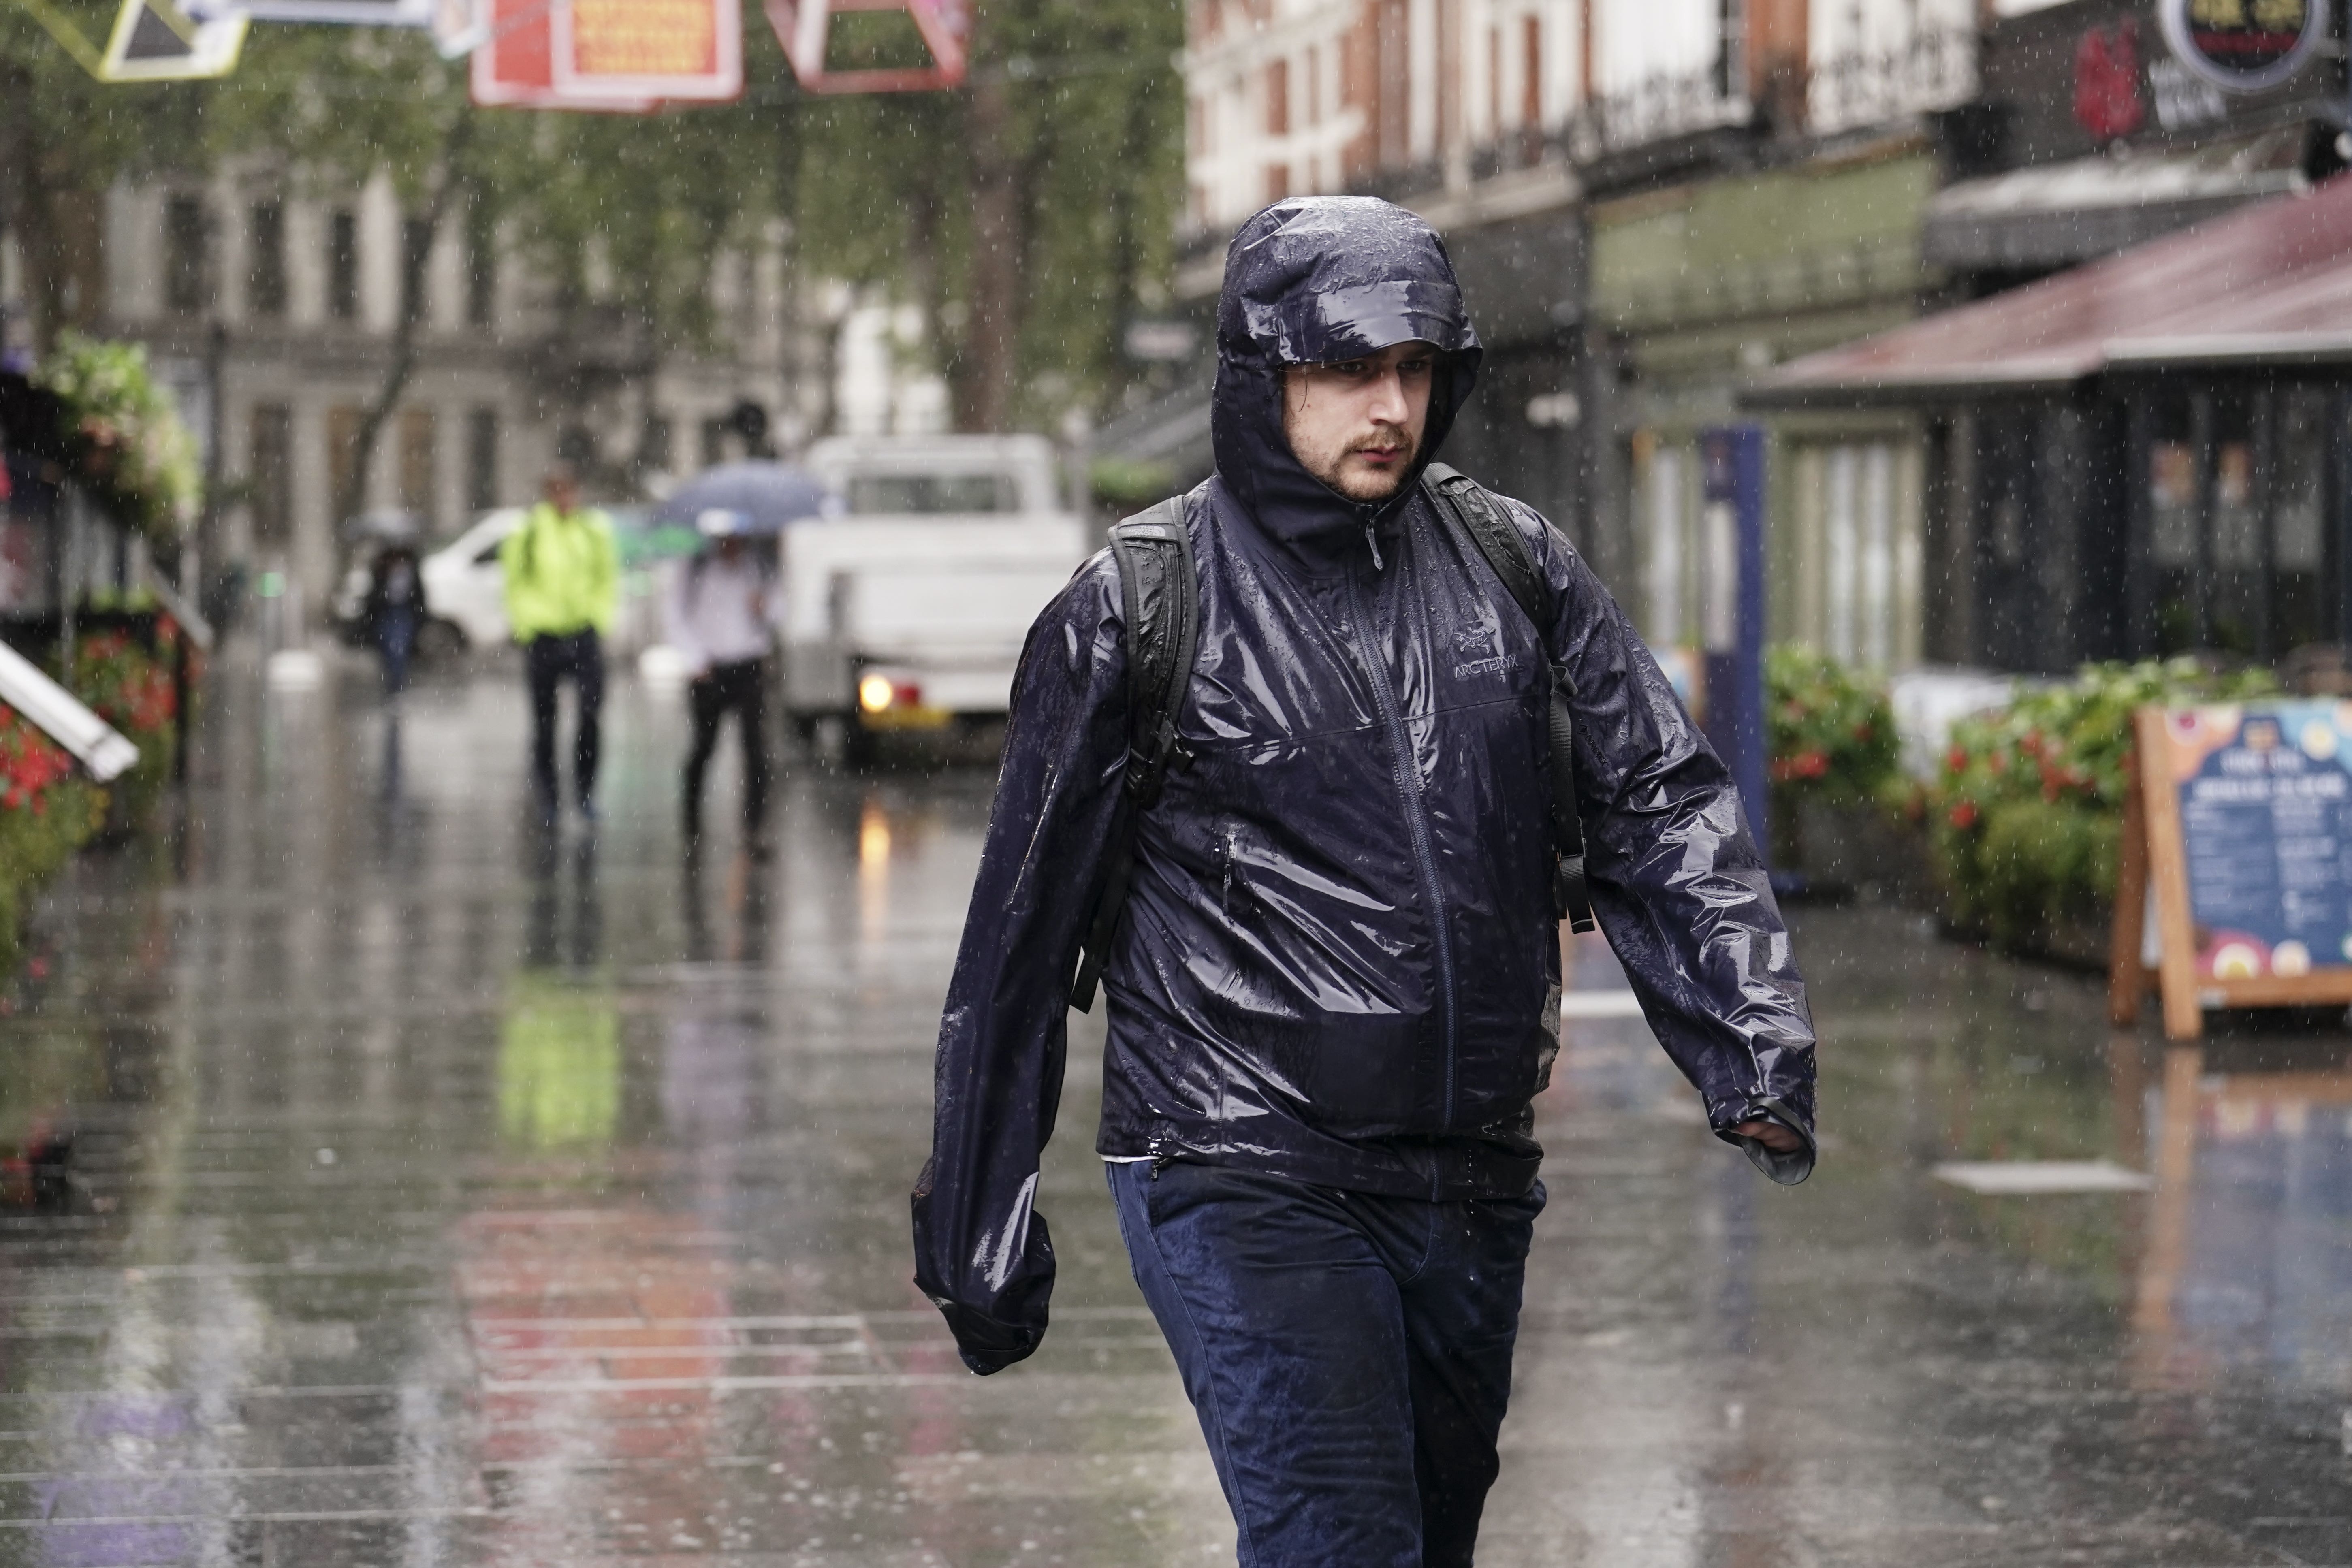 The Met Office has warned of heavy rain and thunderstorms across parts of the UK on Wednesday (Jordan Pettitt/PA)